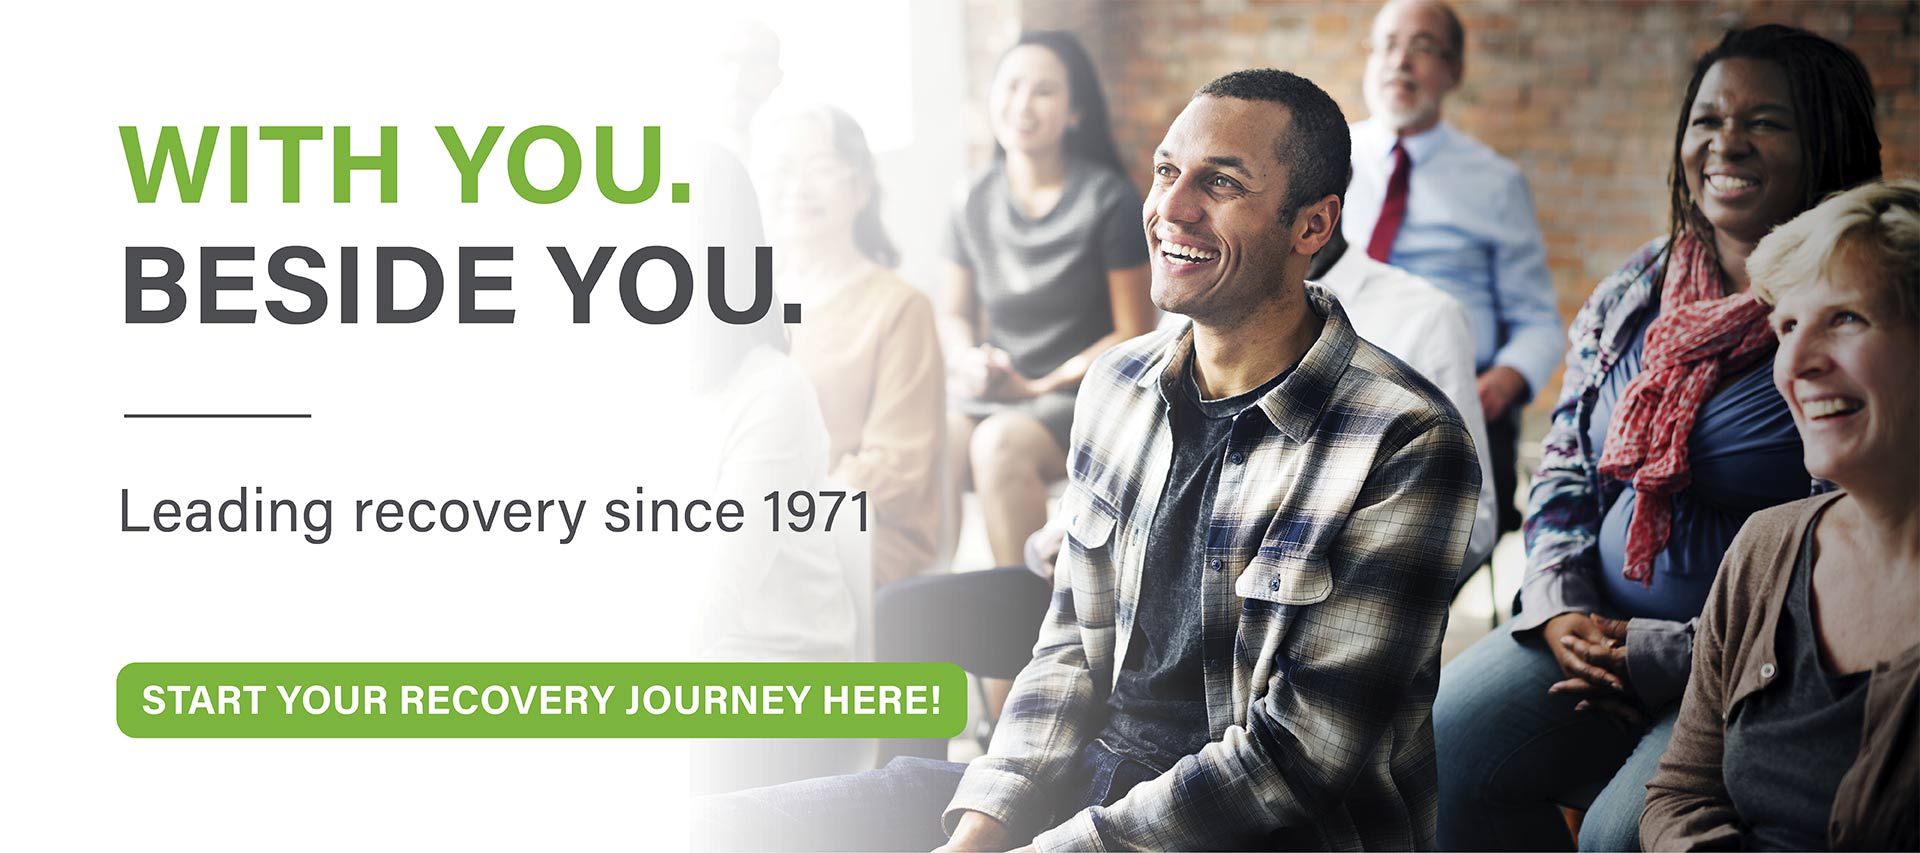 With You. Beside You. Leading Recovery Since 1971.